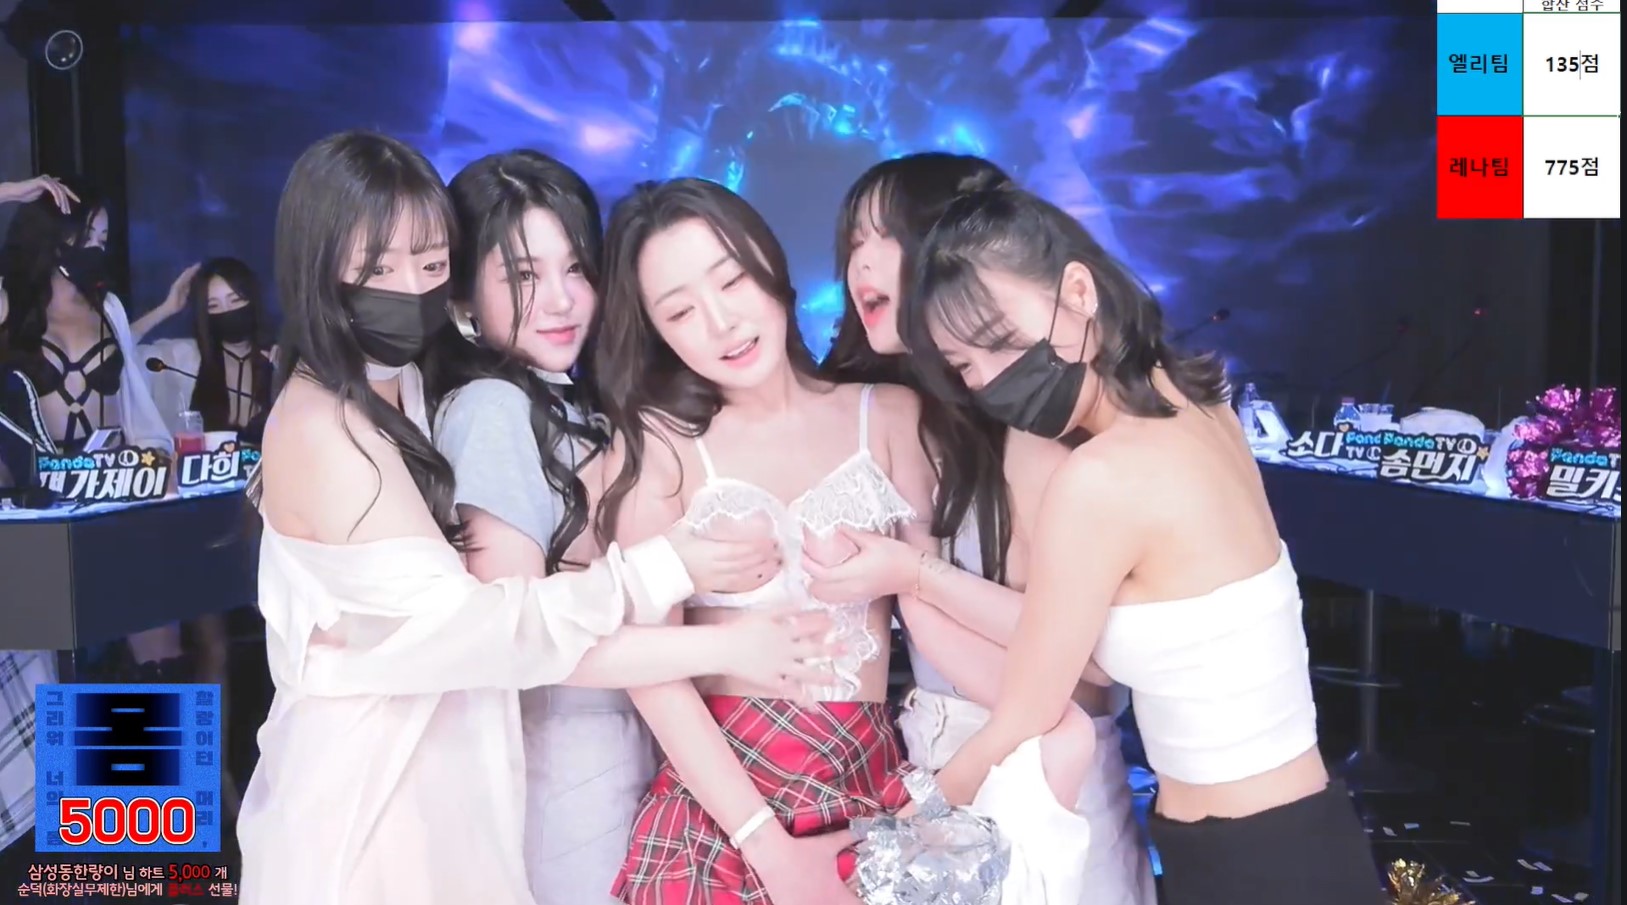 March 2024, the king of the bomb, worth 3000 yuan a group of female obscene broadcast [jinricp] Korean BJ girl group appearance, the hot gold songs, professional trainees, beauty a lot of super boutique 3 hours